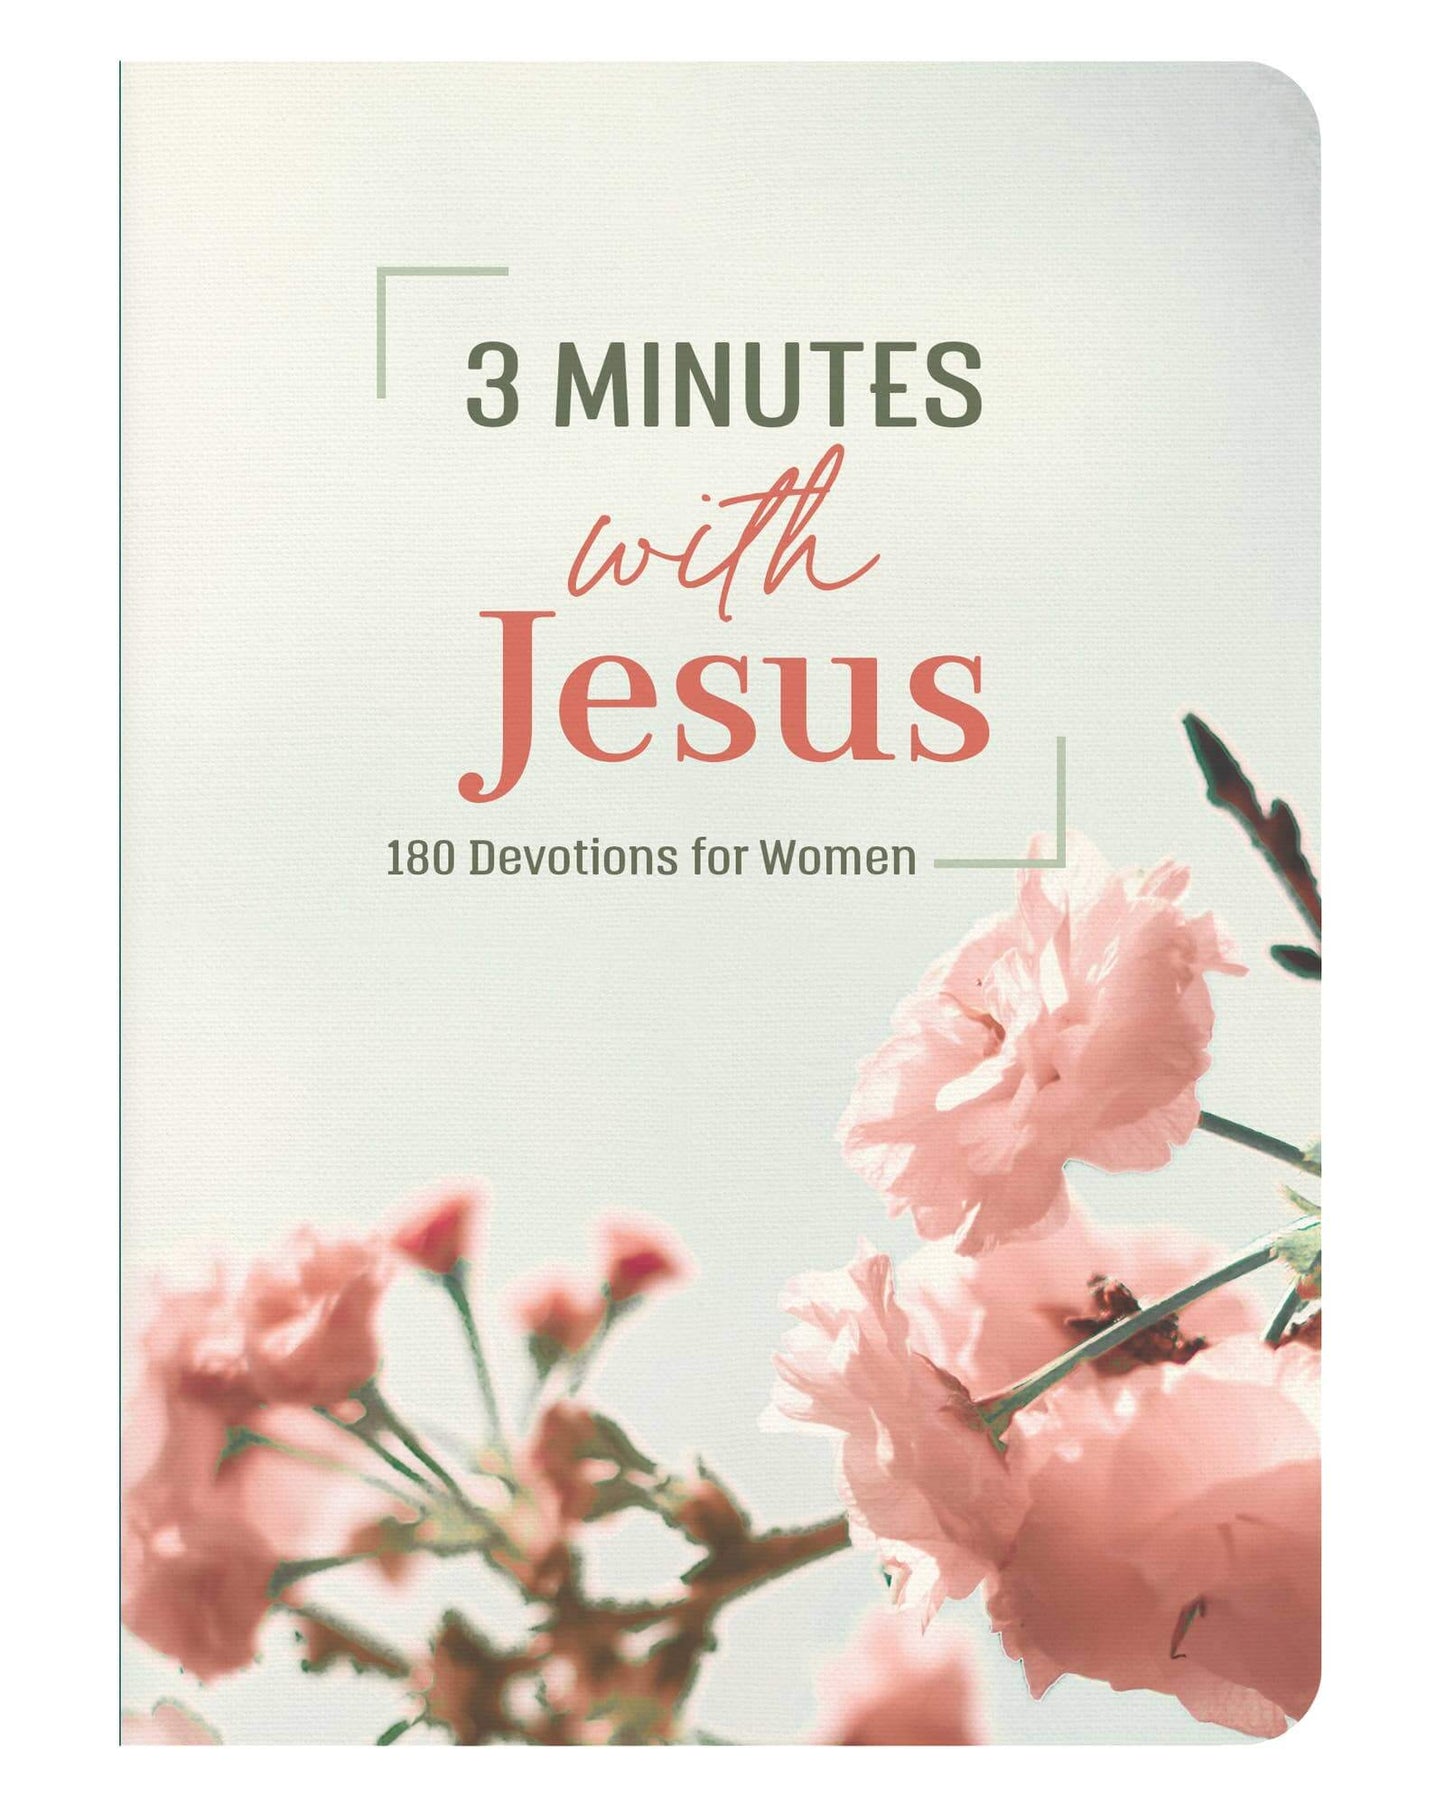 3 Minutes with Jesus: 180 Devotions for Women | 2FruitBearers